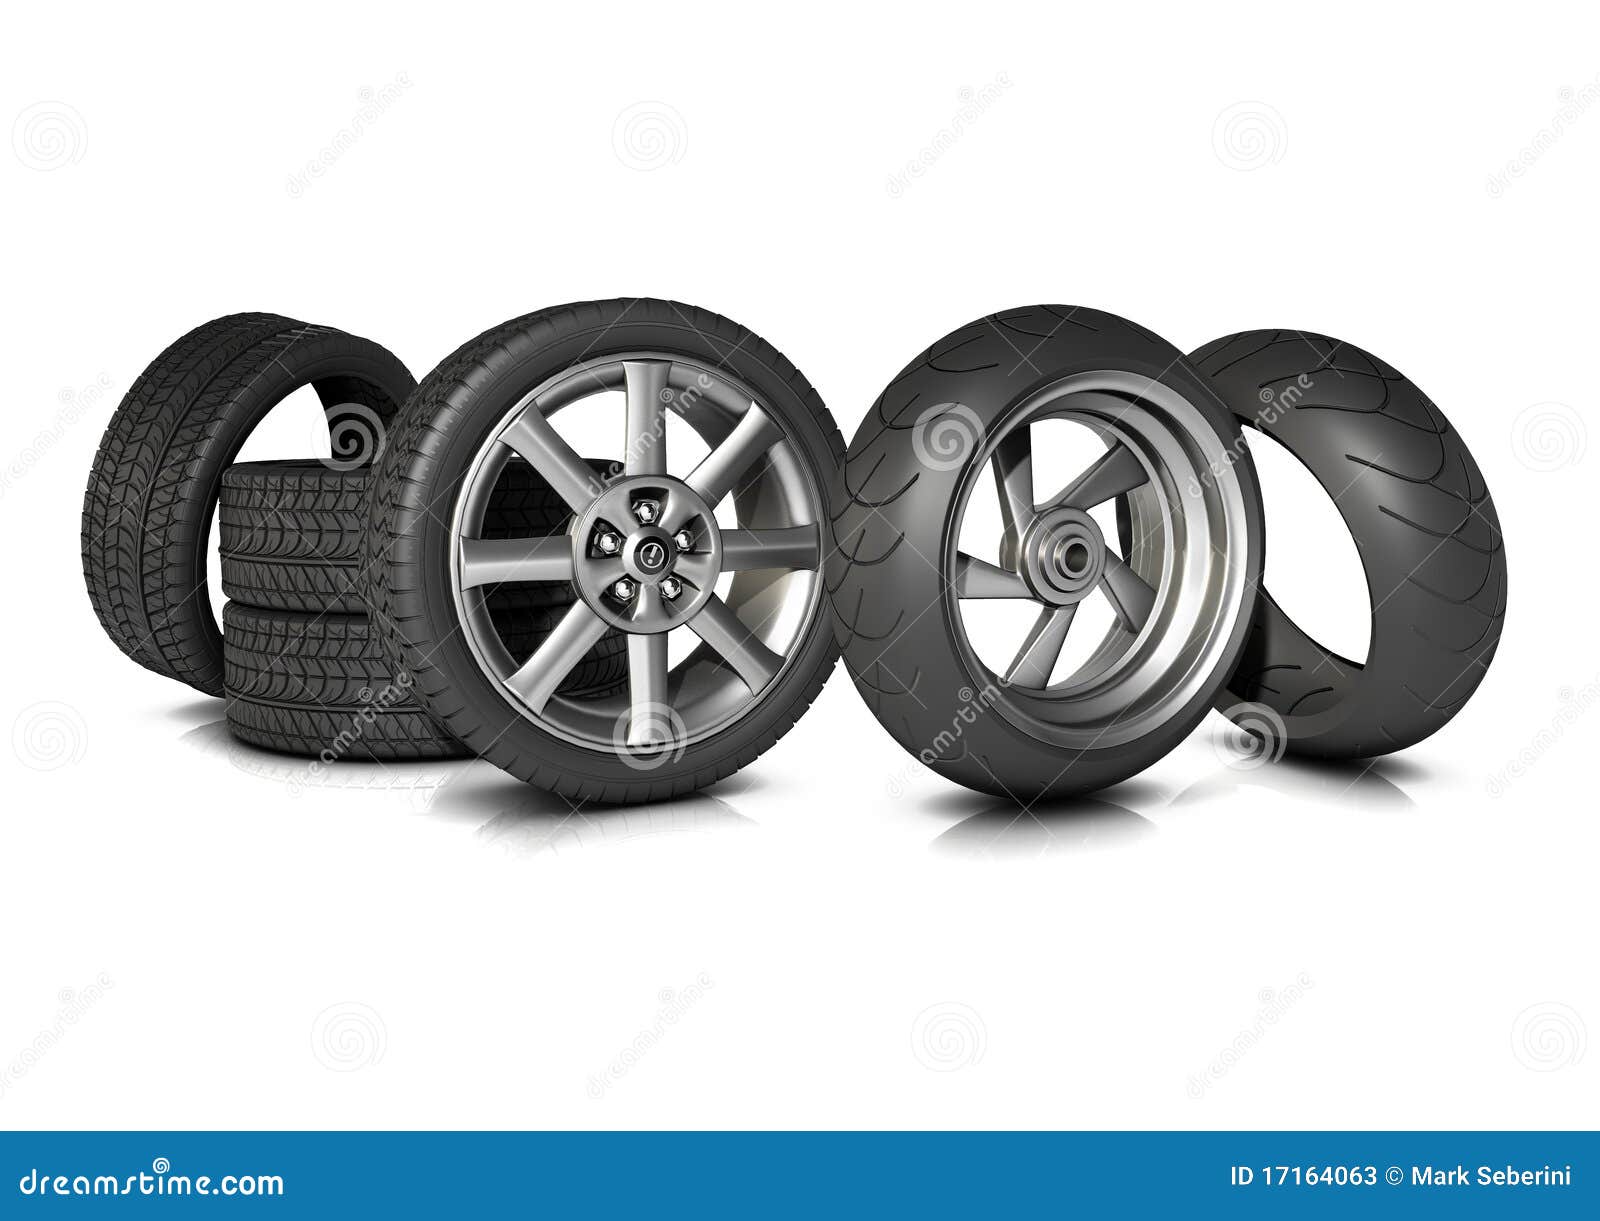 bike and car tyres